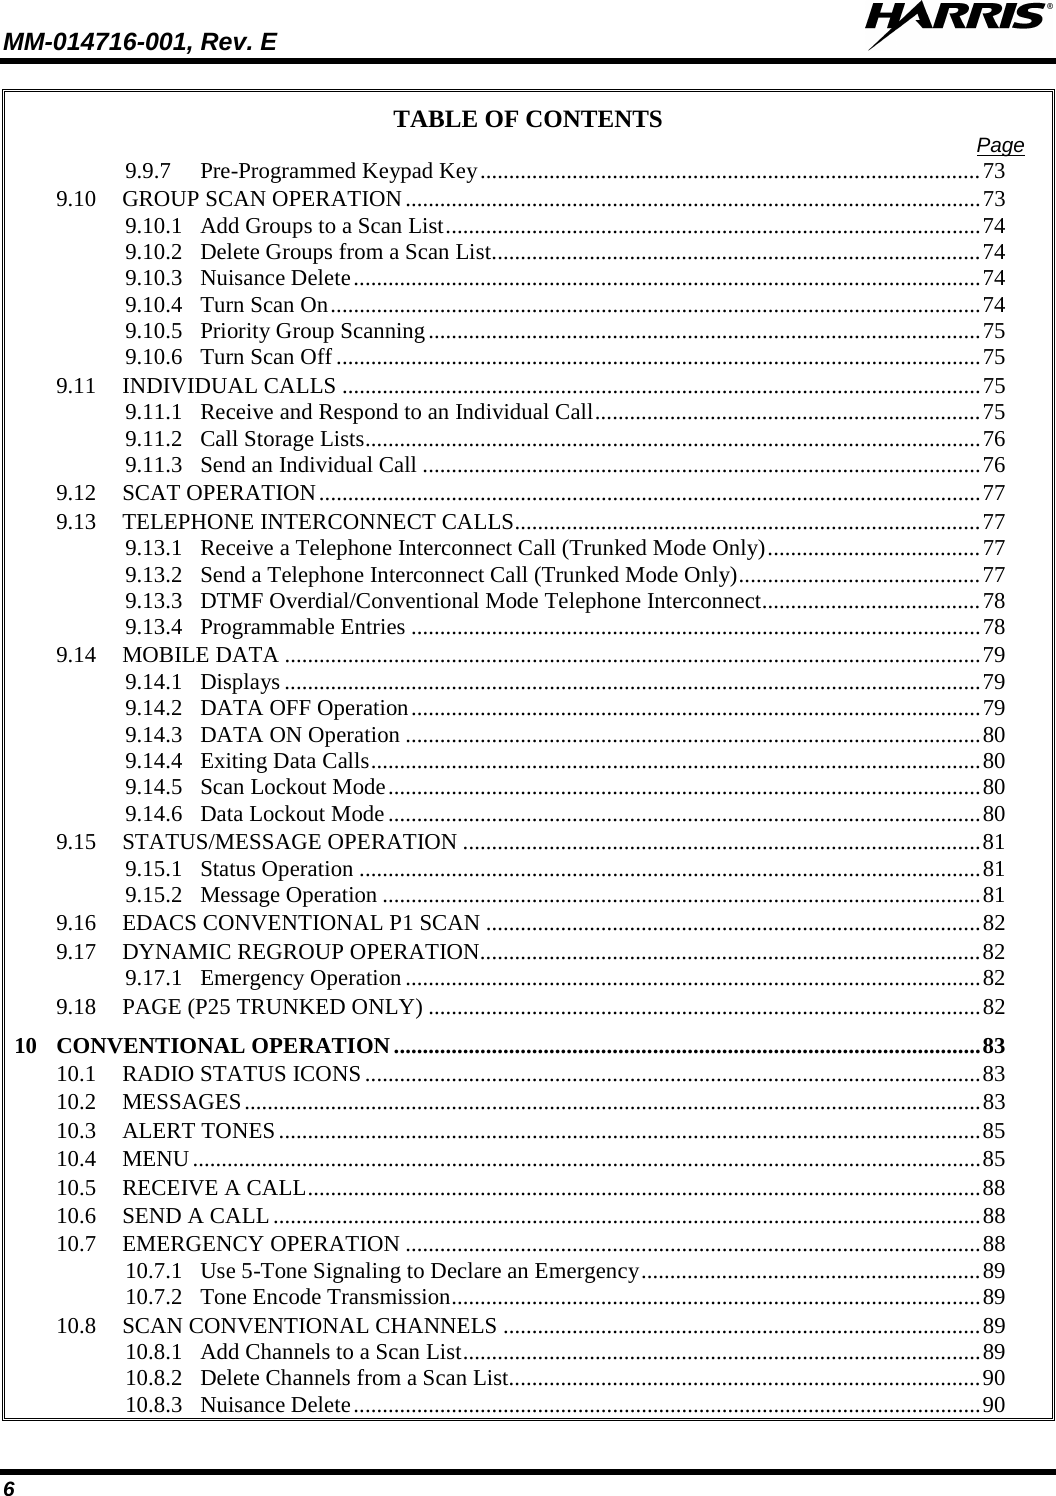 MM-014716-001, Rev. E  6 TABLE OF CONTENTS Page 9.9.7 Pre-Programmed Keypad Key ....................................................................................... 73 9.10 GROUP SCAN OPERATION .................................................................................................... 73 9.10.1 Add Groups to a Scan List ............................................................................................. 74 9.10.2 Delete Groups from a Scan List ..................................................................................... 74 9.10.3 Nuisance Delete ............................................................................................................. 74 9.10.4 Turn Scan On ................................................................................................................. 74 9.10.5 Priority Group Scanning ................................................................................................ 75 9.10.6 Turn Scan Off ................................................................................................................ 75 9.11 INDIVIDUAL CALLS ............................................................................................................... 75 9.11.1 Receive and Respond to an Individual Call ................................................................... 75 9.11.2 Call Storage Lists ........................................................................................................... 76 9.11.3 Send an Individual Call ................................................................................................. 76 9.12 SCAT OPERATION ................................................................................................................... 77 9.13 TELEPHONE INTERCONNECT CALLS................................................................................. 77 9.13.1 Receive a Telephone Interconnect Call (Trunked Mode Only) ..................................... 77 9.13.2 Send a Telephone Interconnect Call (Trunked Mode Only) .......................................... 77 9.13.3 DTMF Overdial/Conventional Mode Telephone Interconnect ...................................... 78 9.13.4 Programmable Entries ................................................................................................... 78 9.14 MOBILE DATA ......................................................................................................................... 79 9.14.1 Displays ......................................................................................................................... 79 9.14.2 DATA OFF Operation ................................................................................................... 79 9.14.3 DATA ON Operation .................................................................................................... 80 9.14.4 Exiting Data Calls .......................................................................................................... 80 9.14.5 Scan Lockout Mode ....................................................................................................... 80 9.14.6 Data Lockout Mode ....................................................................................................... 80 9.15 STATUS/MESSAGE OPERATION .......................................................................................... 81 9.15.1 Status Operation ............................................................................................................ 81 9.15.2 Message Operation ........................................................................................................ 81 9.16 EDACS CONVENTIONAL P1 SCAN ...................................................................................... 82 9.17 DYNAMIC REGROUP OPERATION....................................................................................... 82 9.17.1 Emergency Operation .................................................................................................... 82 9.18 PAGE (P25 TRUNKED ONLY) ................................................................................................ 82 10 CONVENTIONAL OPERATION ...................................................................................................... 83 10.1 RADIO STATUS ICONS ........................................................................................................... 83 10.2 MESSAGES ................................................................................................................................ 83 10.3 ALERT TONES .......................................................................................................................... 85 10.4 MENU ......................................................................................................................................... 85 10.5 RECEIVE A CALL ..................................................................................................................... 88 10.6 SEND A CALL ........................................................................................................................... 88 10.7 EMERGENCY OPERATION .................................................................................................... 88 10.7.1 Use 5-Tone Signaling to Declare an Emergency ........................................................... 89 10.7.2 Tone Encode Transmission ............................................................................................ 89 10.8 SCAN CONVENTIONAL CHANNELS ................................................................................... 89 10.8.1 Add Channels to a Scan List .......................................................................................... 89 10.8.2 Delete Channels from a Scan List.................................................................................. 90 10.8.3 Nuisance Delete ............................................................................................................. 90 